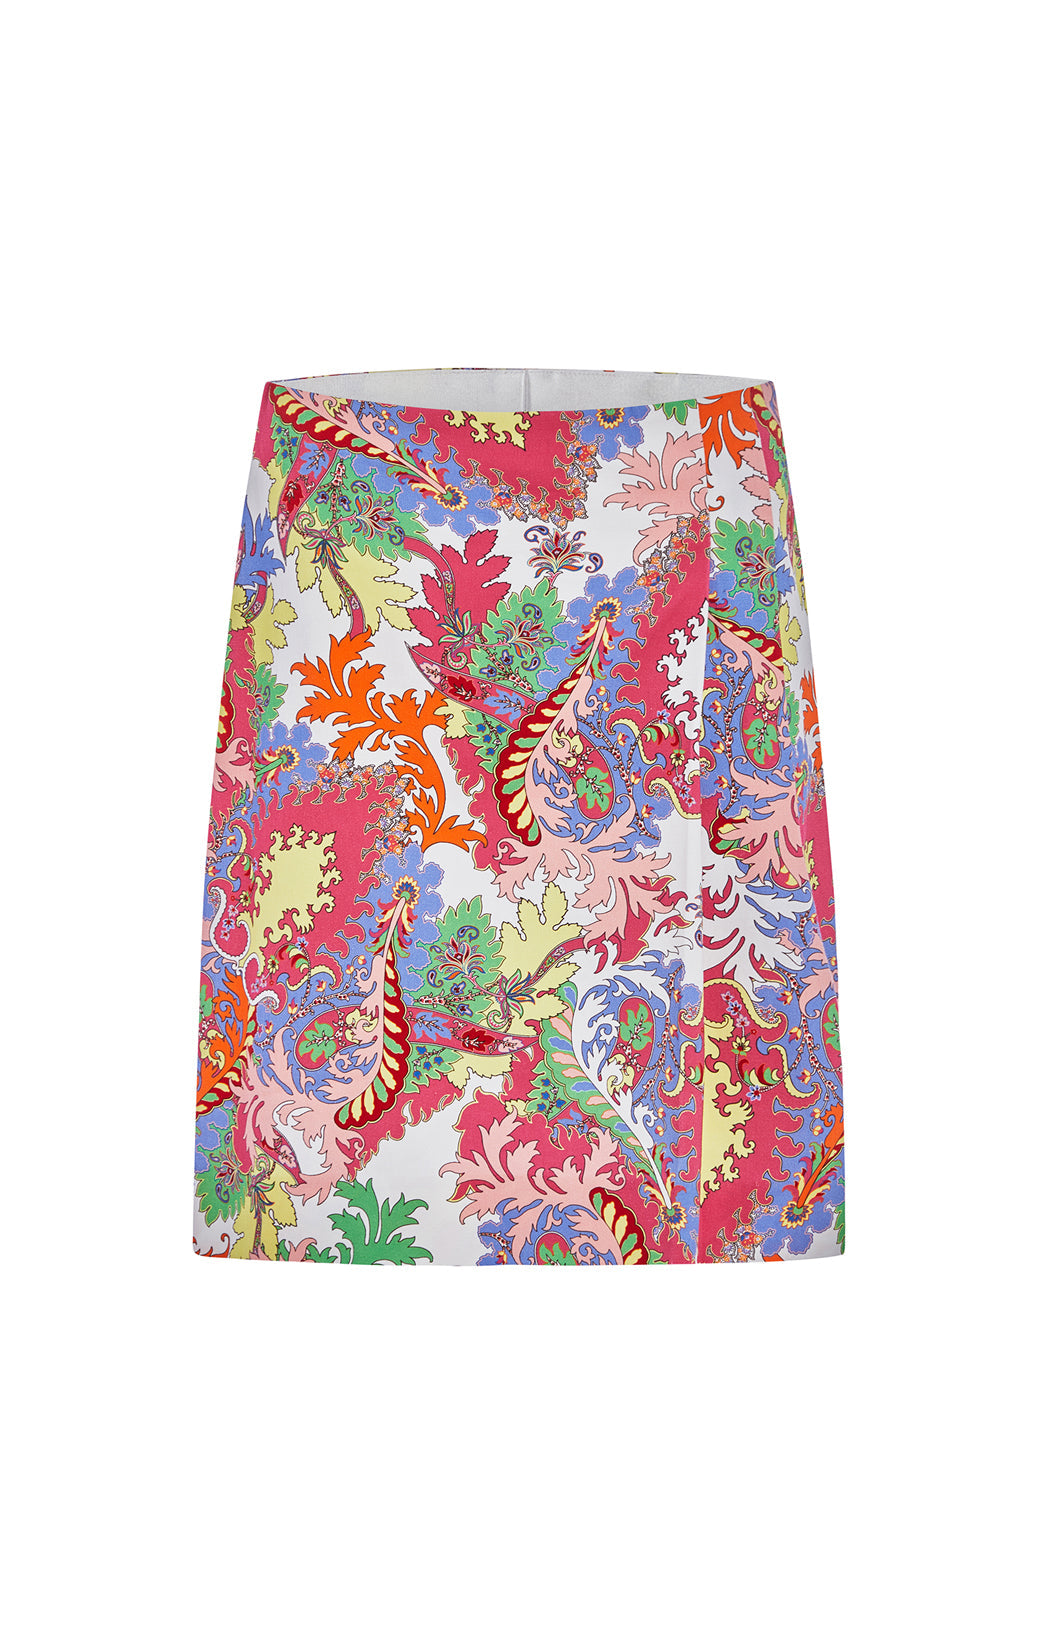 Frond - Placed Floral Jacquard Knit Skirt - Product Image